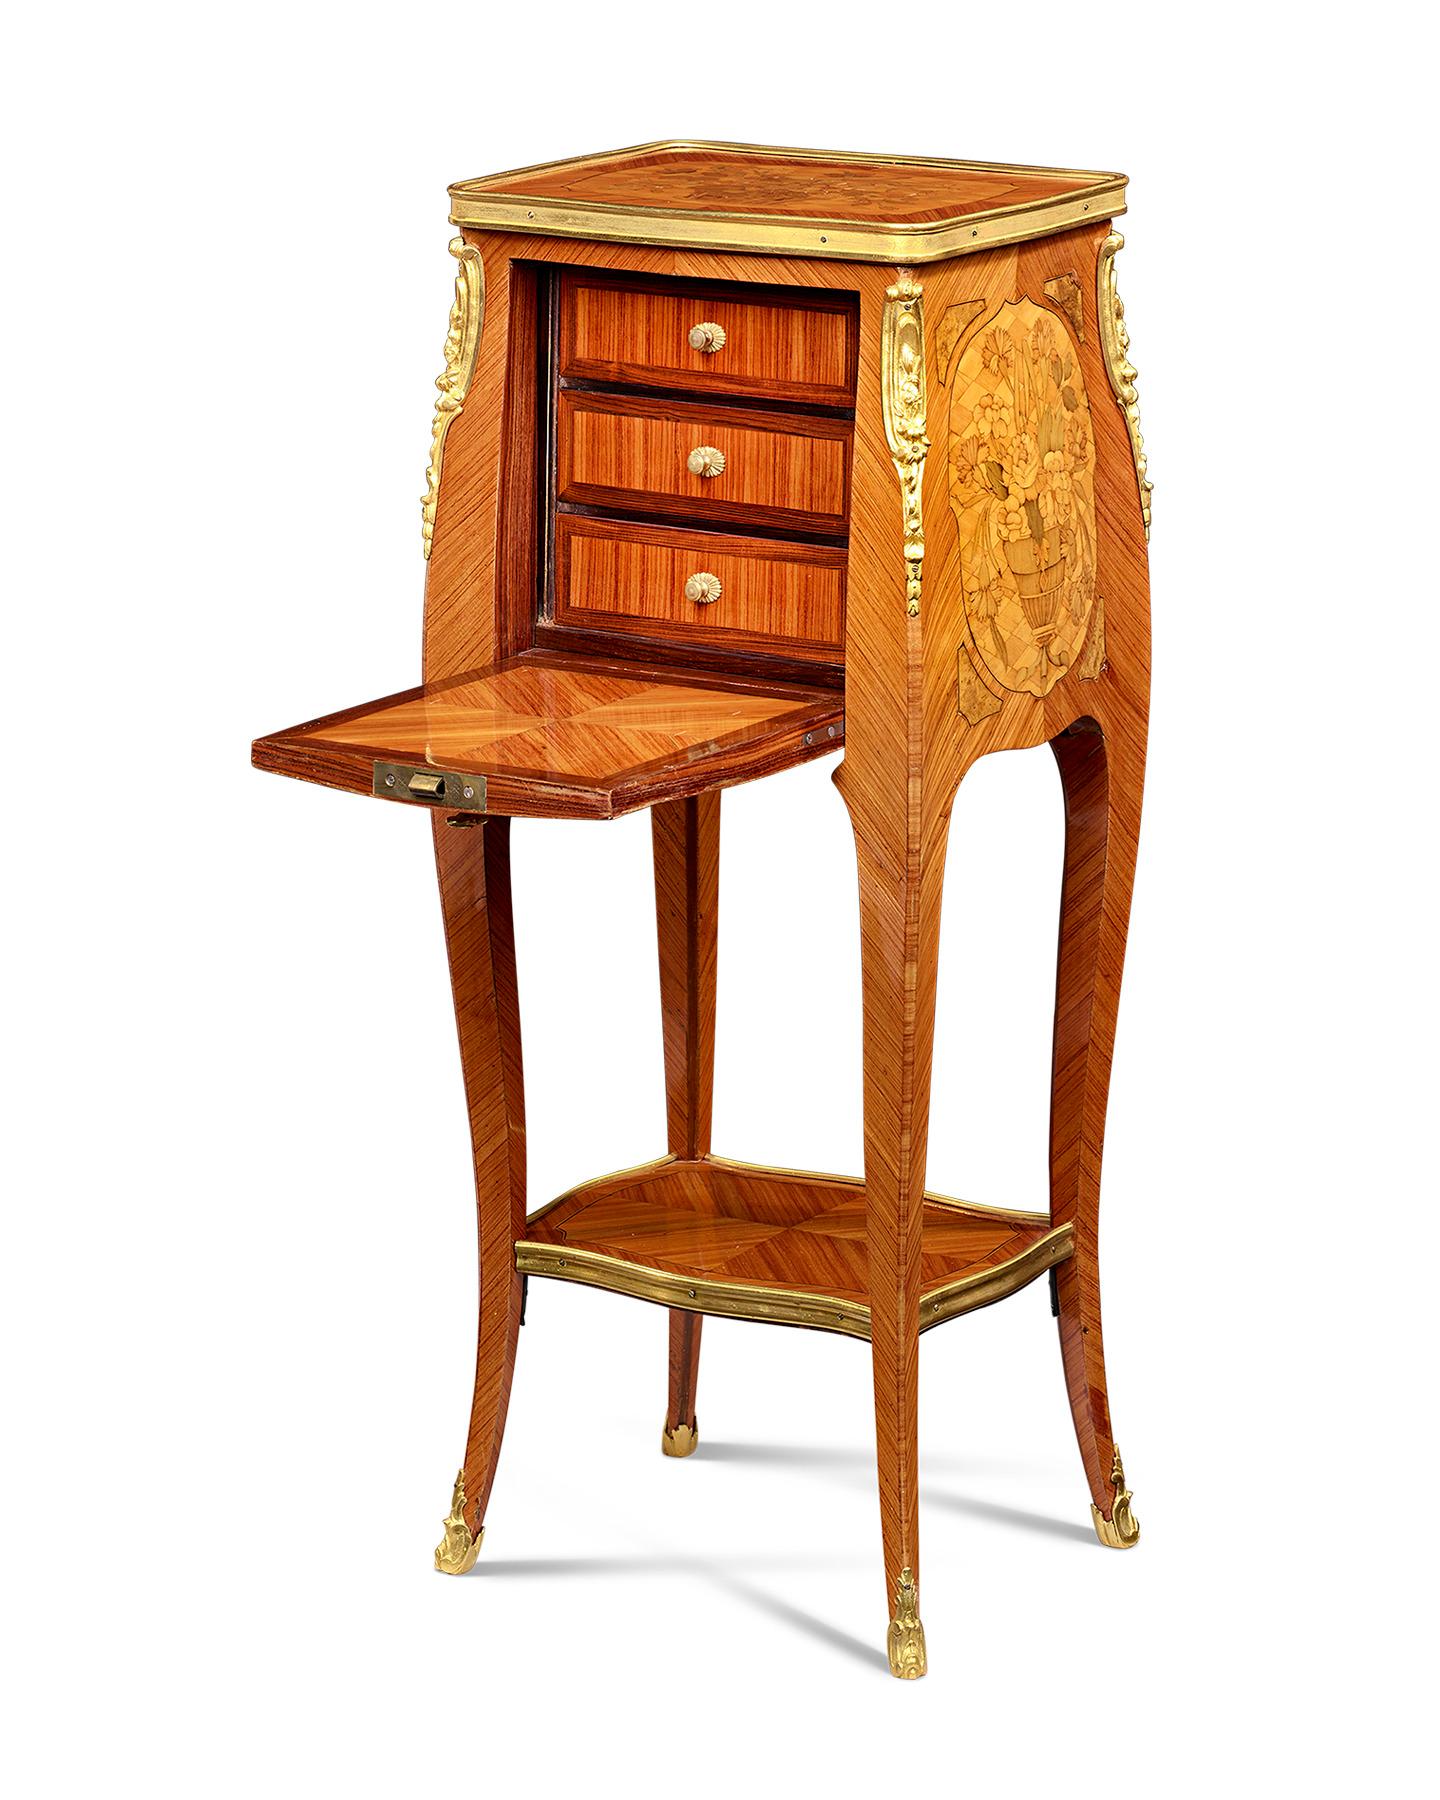 Eloquent marquetry and faithful interpretation of the Louis XVI taste characterize this beautiful French side table. The tabletop, sides and front panel all feature classical urns and baskets bursting forth with lush floral bouquets masterfully